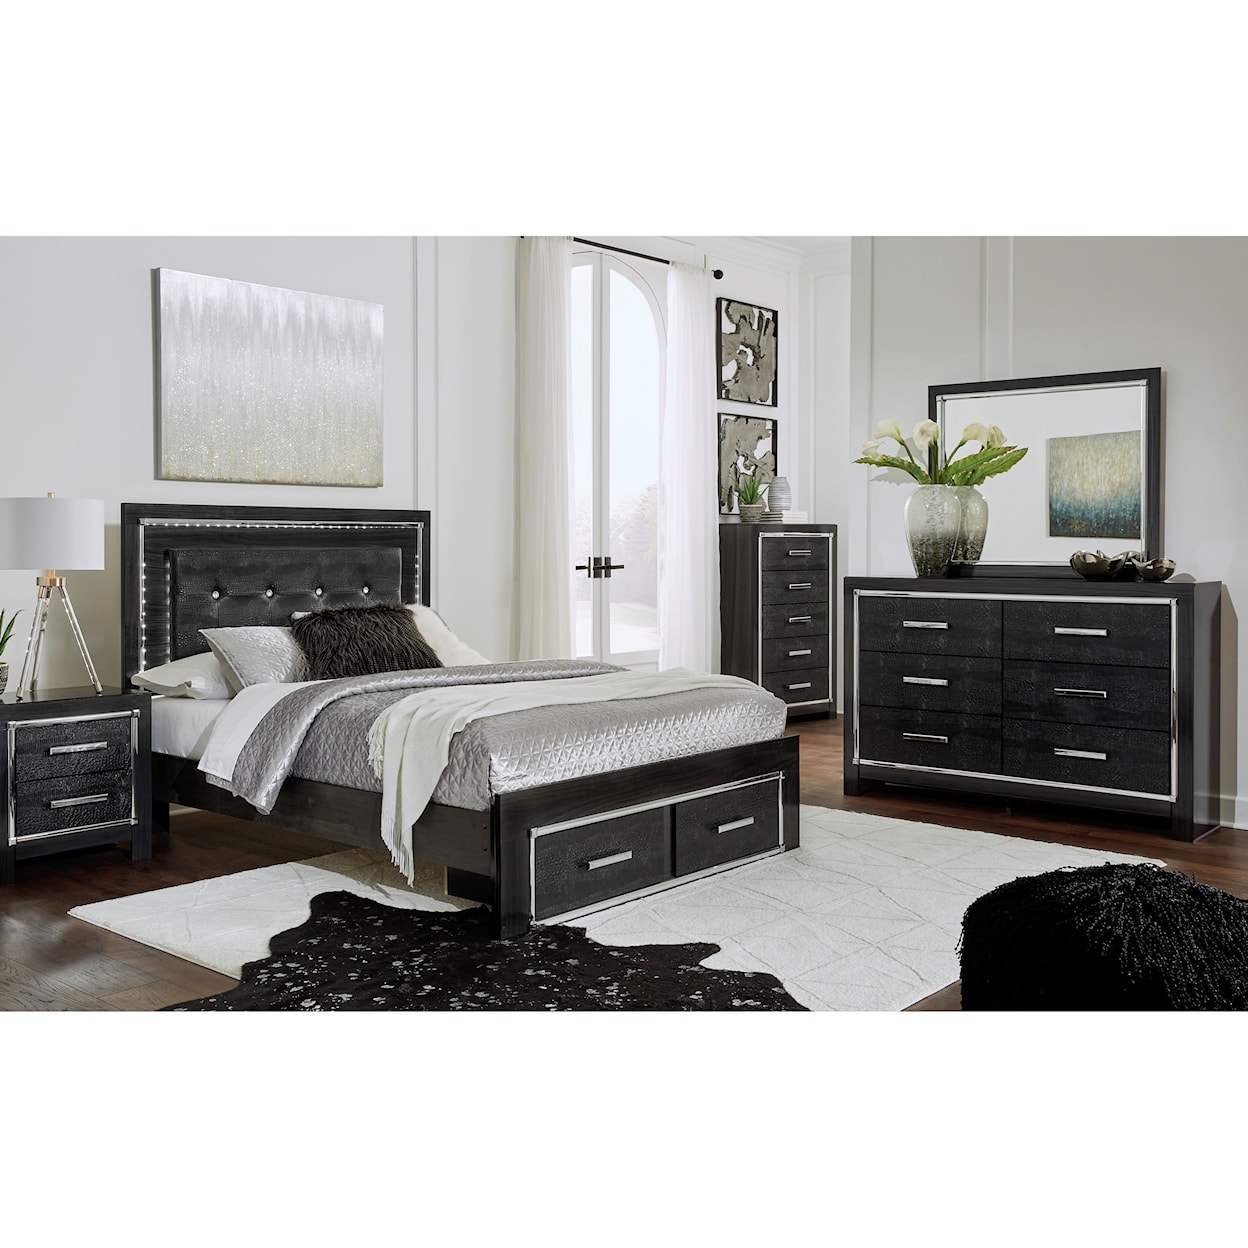 Ashley Signature Design Kaydell Queen Uph Storage Bed with LED Lighting